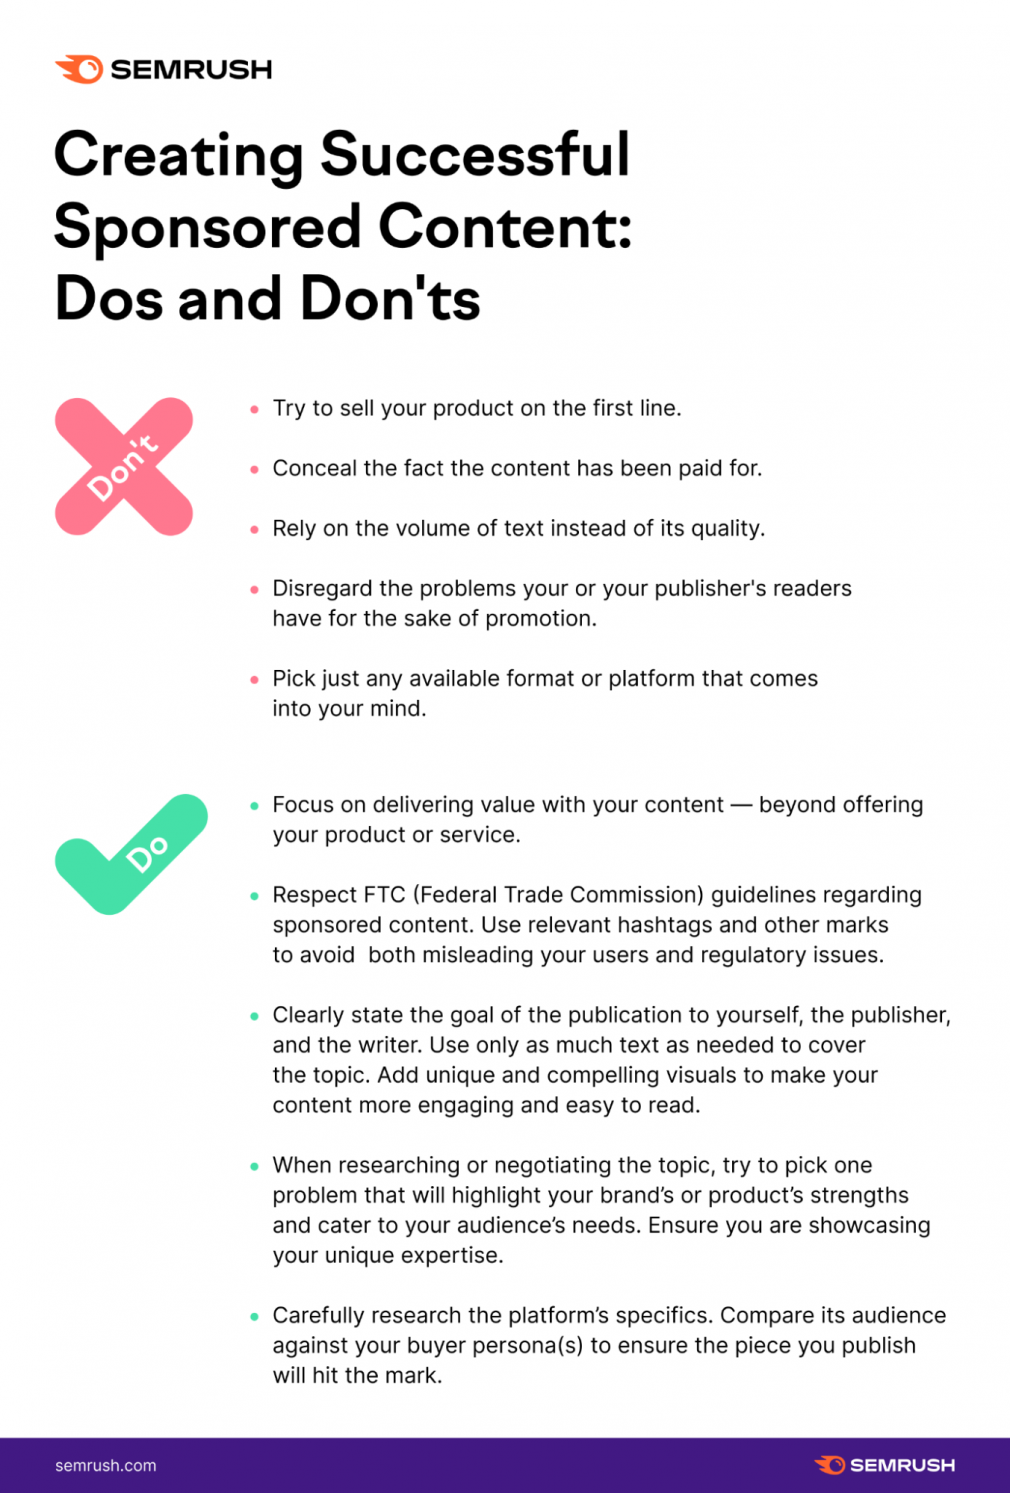 Creating Successful Sponsored Content: Dos and Don'ts